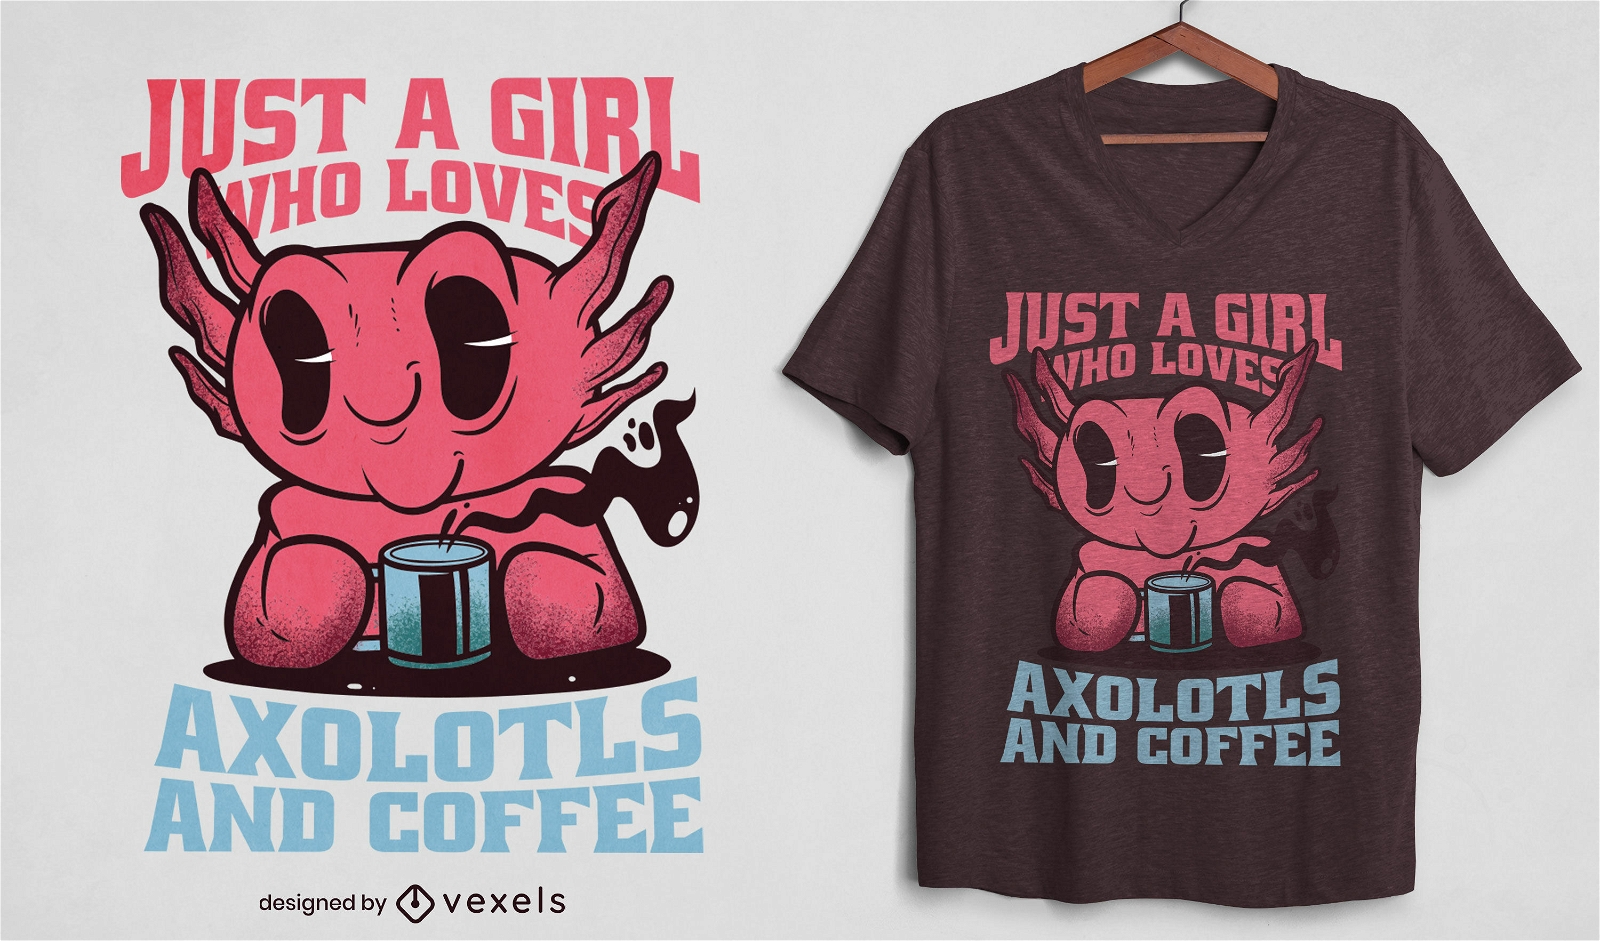 Axolotls and coffee quote t-shirt design